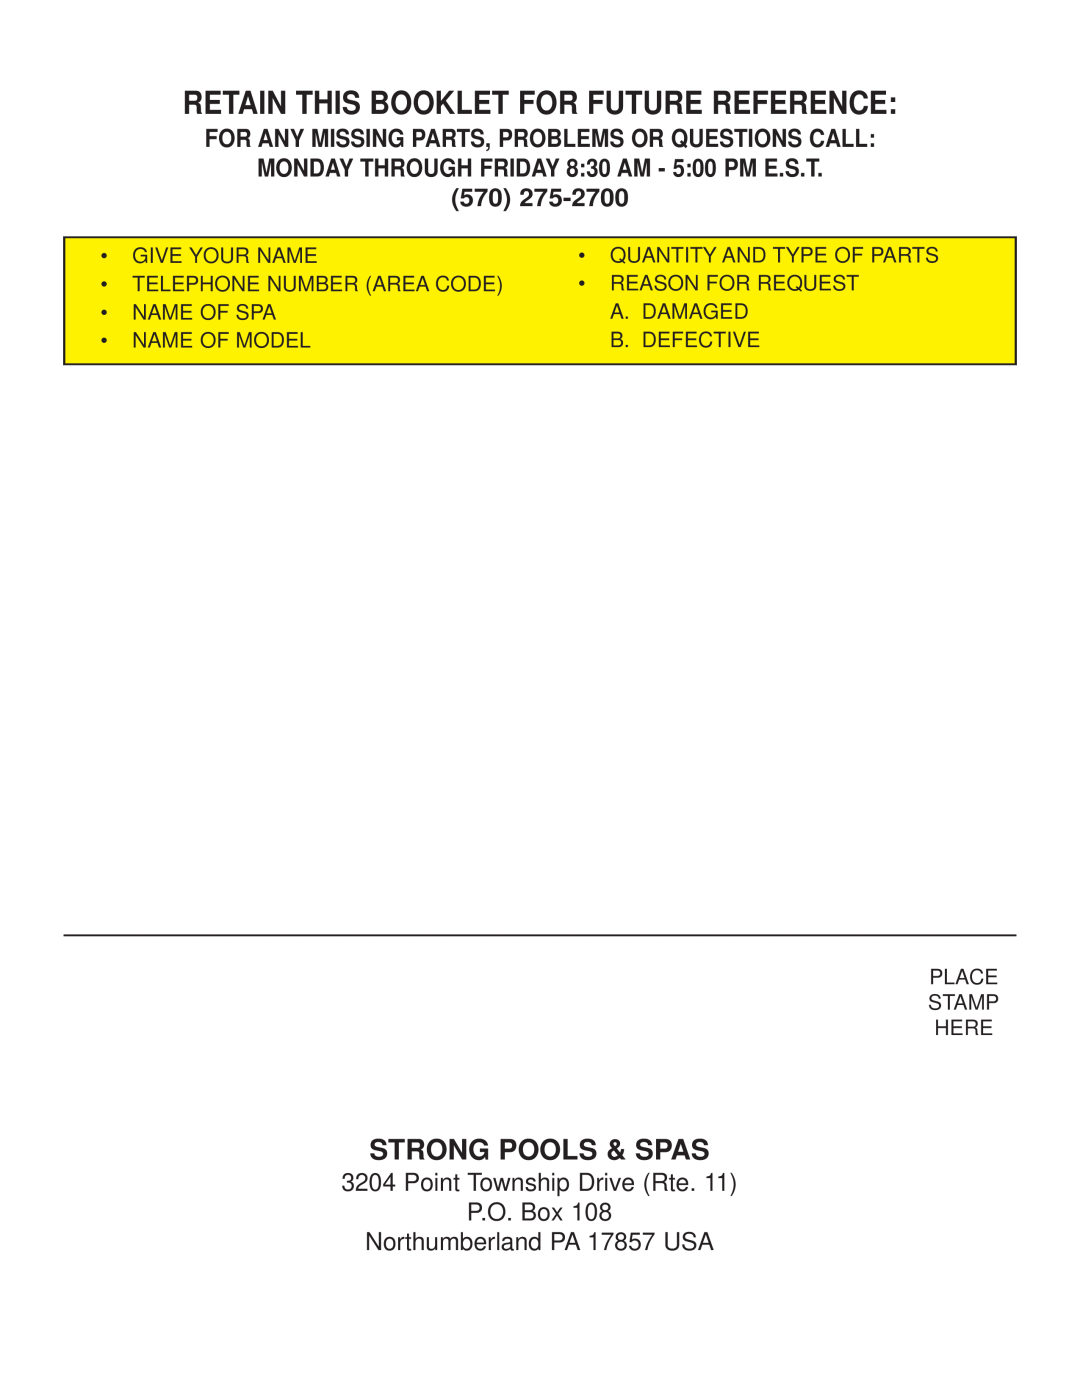 Strong Pools and Spas Rotational Molded resin whirlpool spa Retain This Booklet For Future Reference, Strong Pools & Spas 